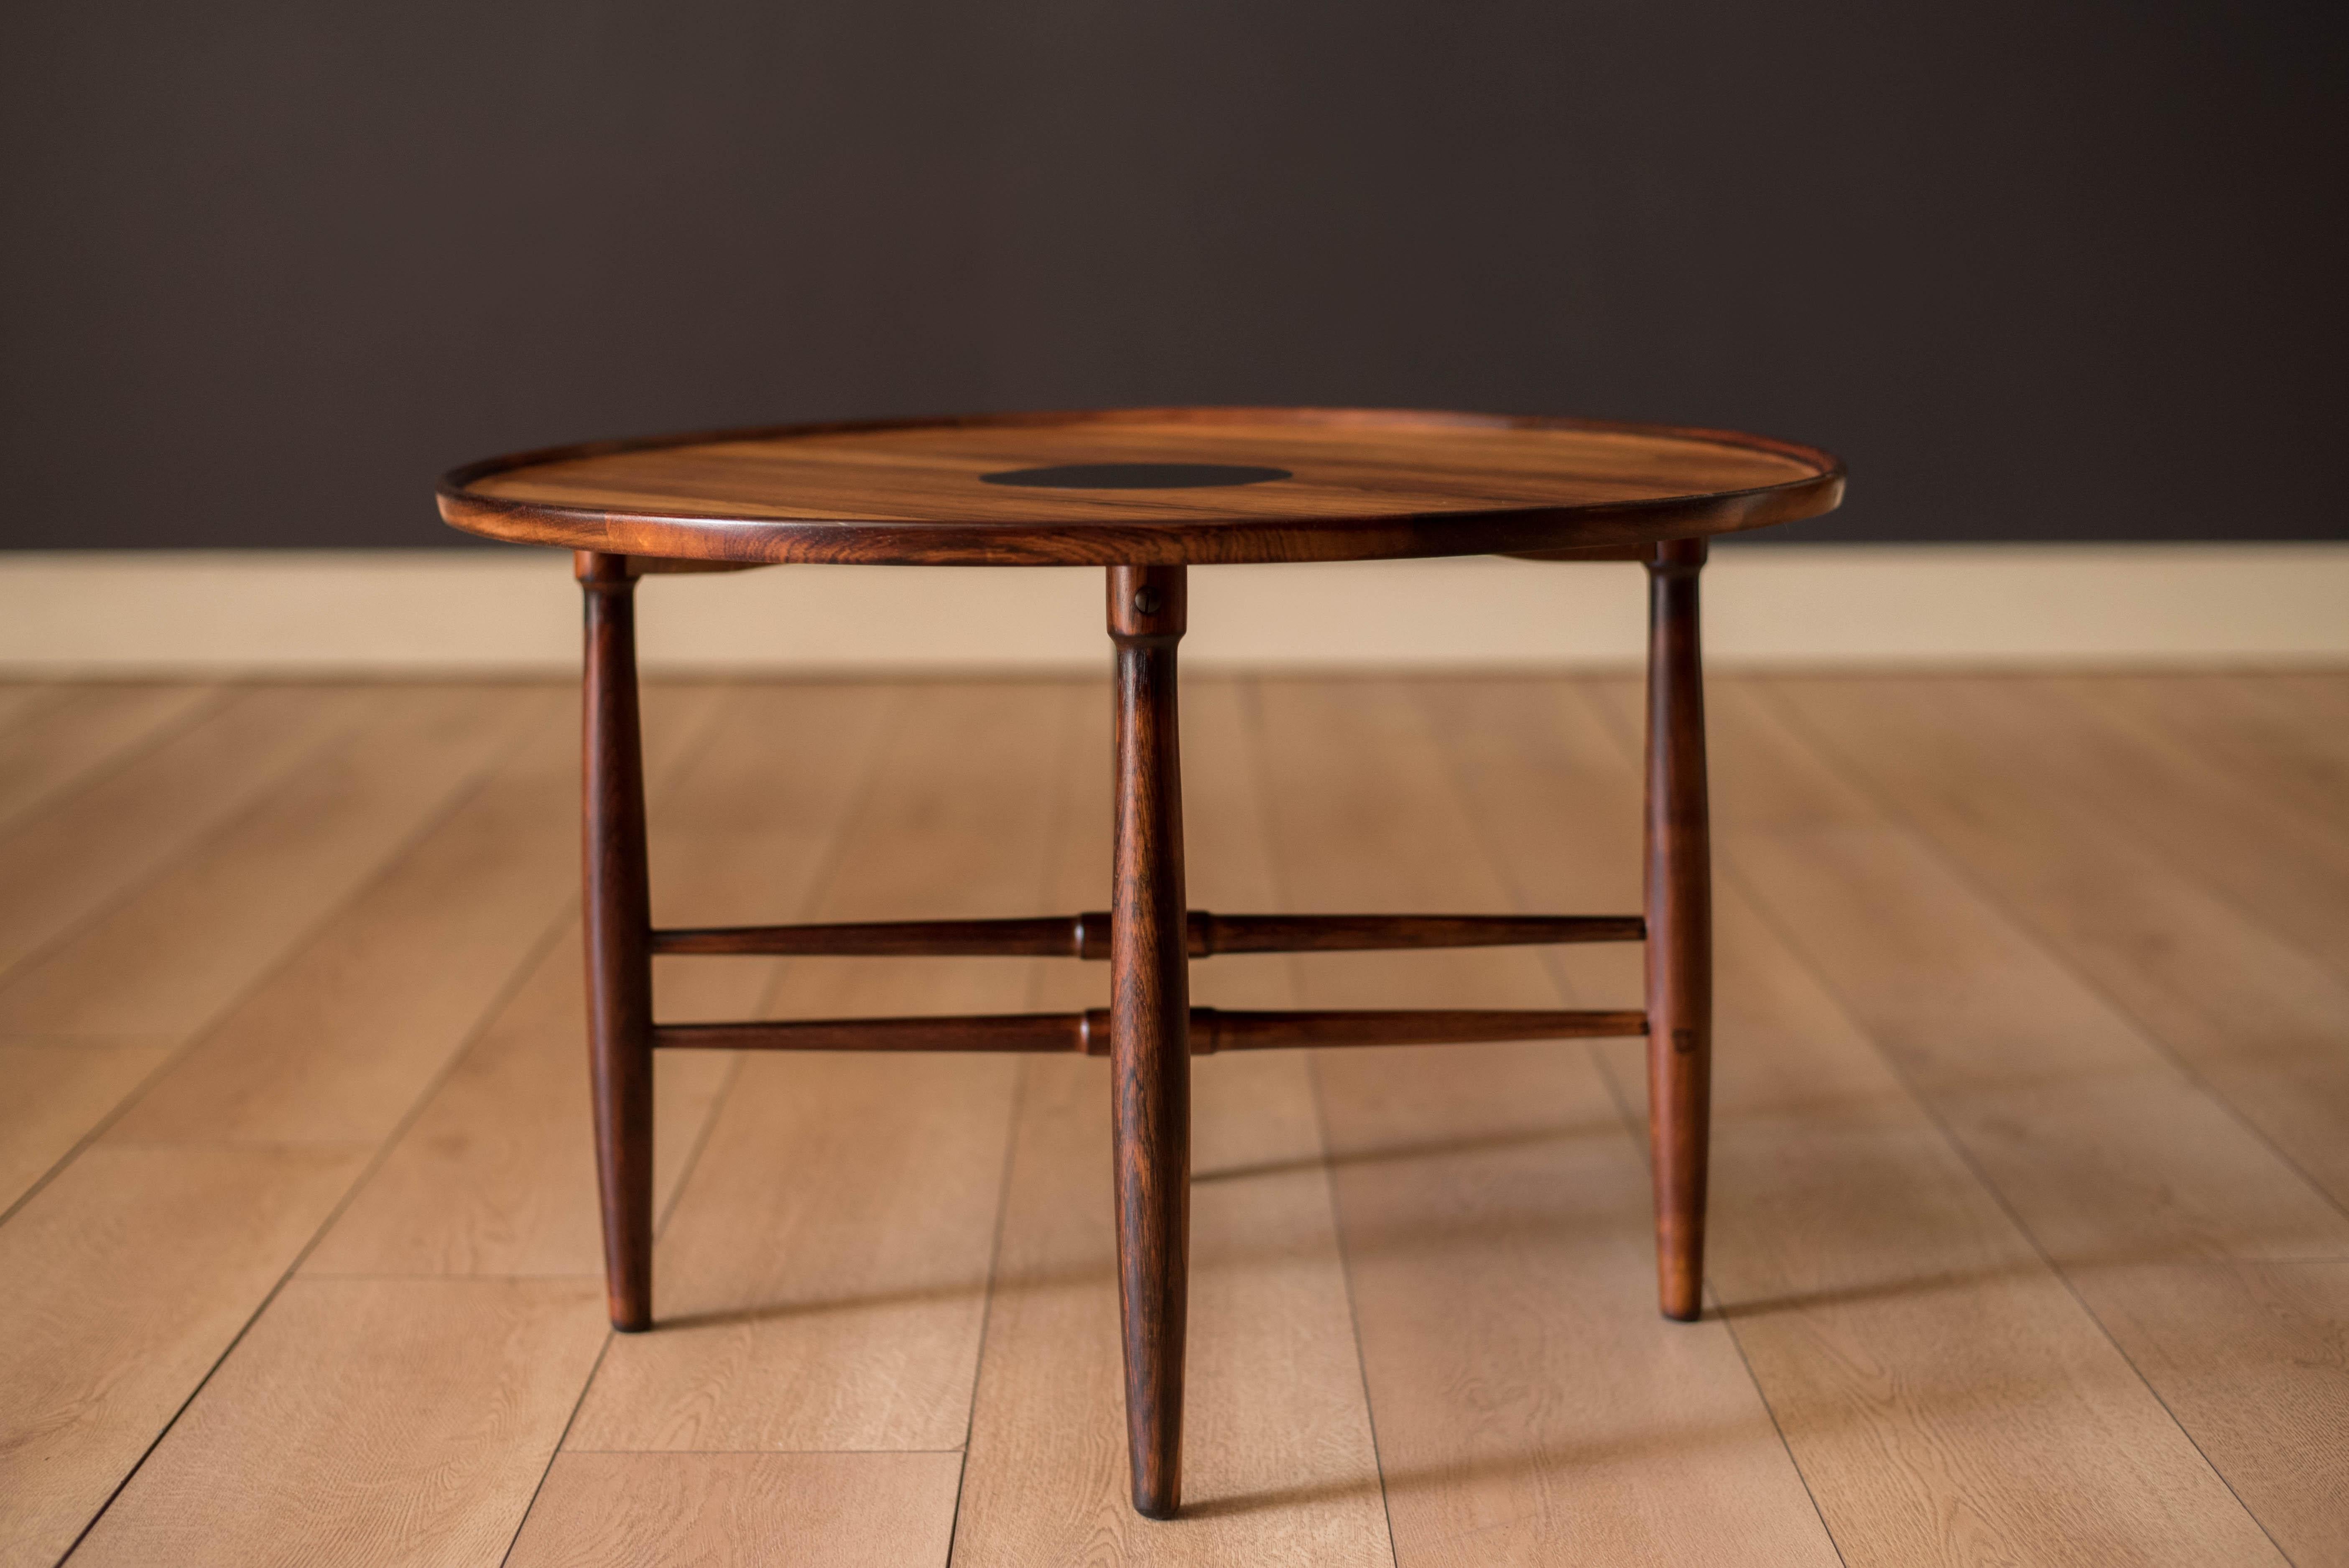 Vintage Danish Rosewood Round Occasional Side Table by Poul Hundevad In Good Condition For Sale In San Jose, CA